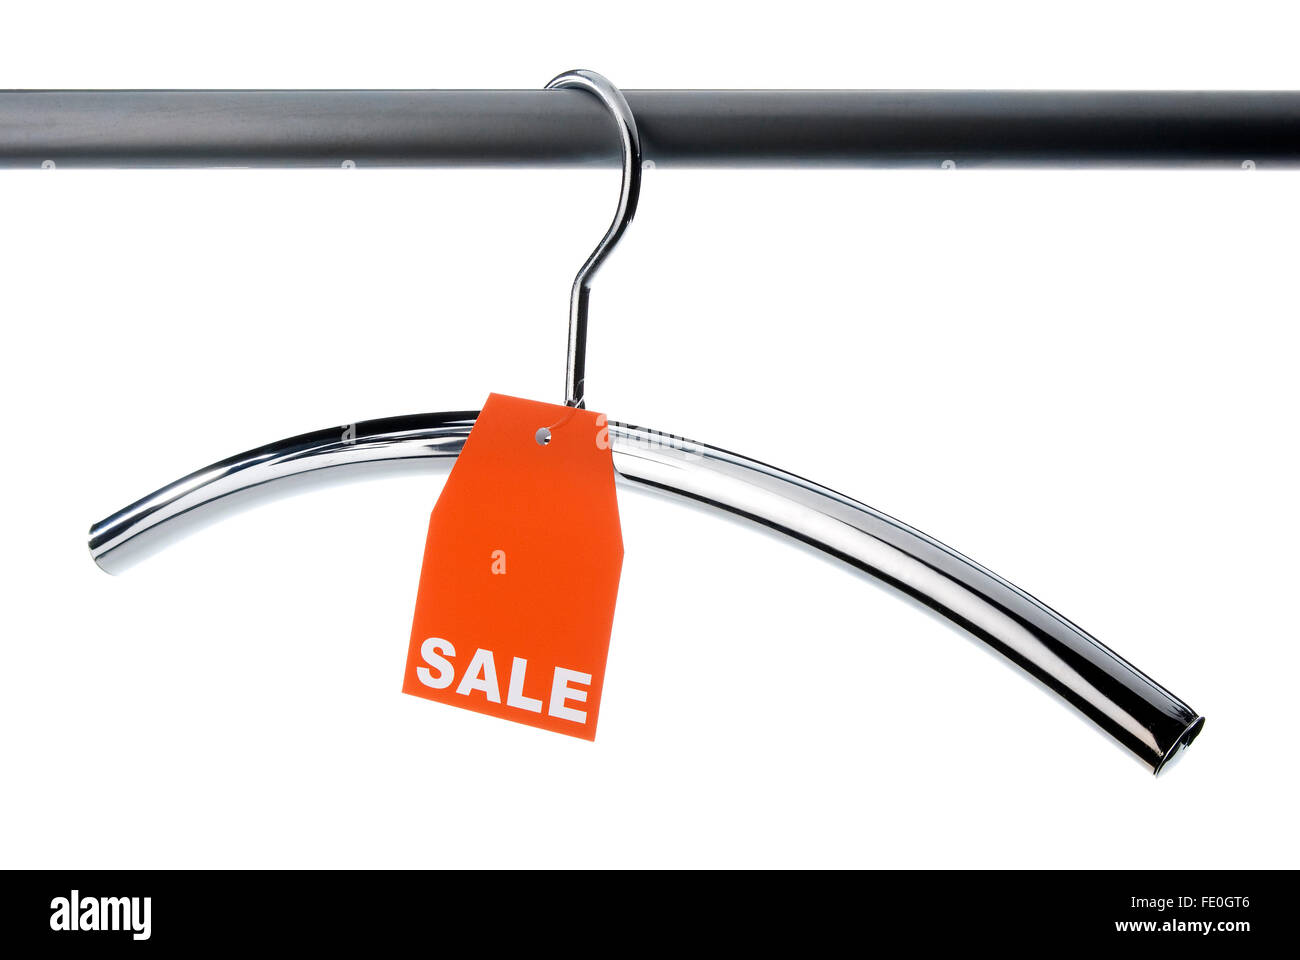 Hangers made of metal with Sale label Stock Photo